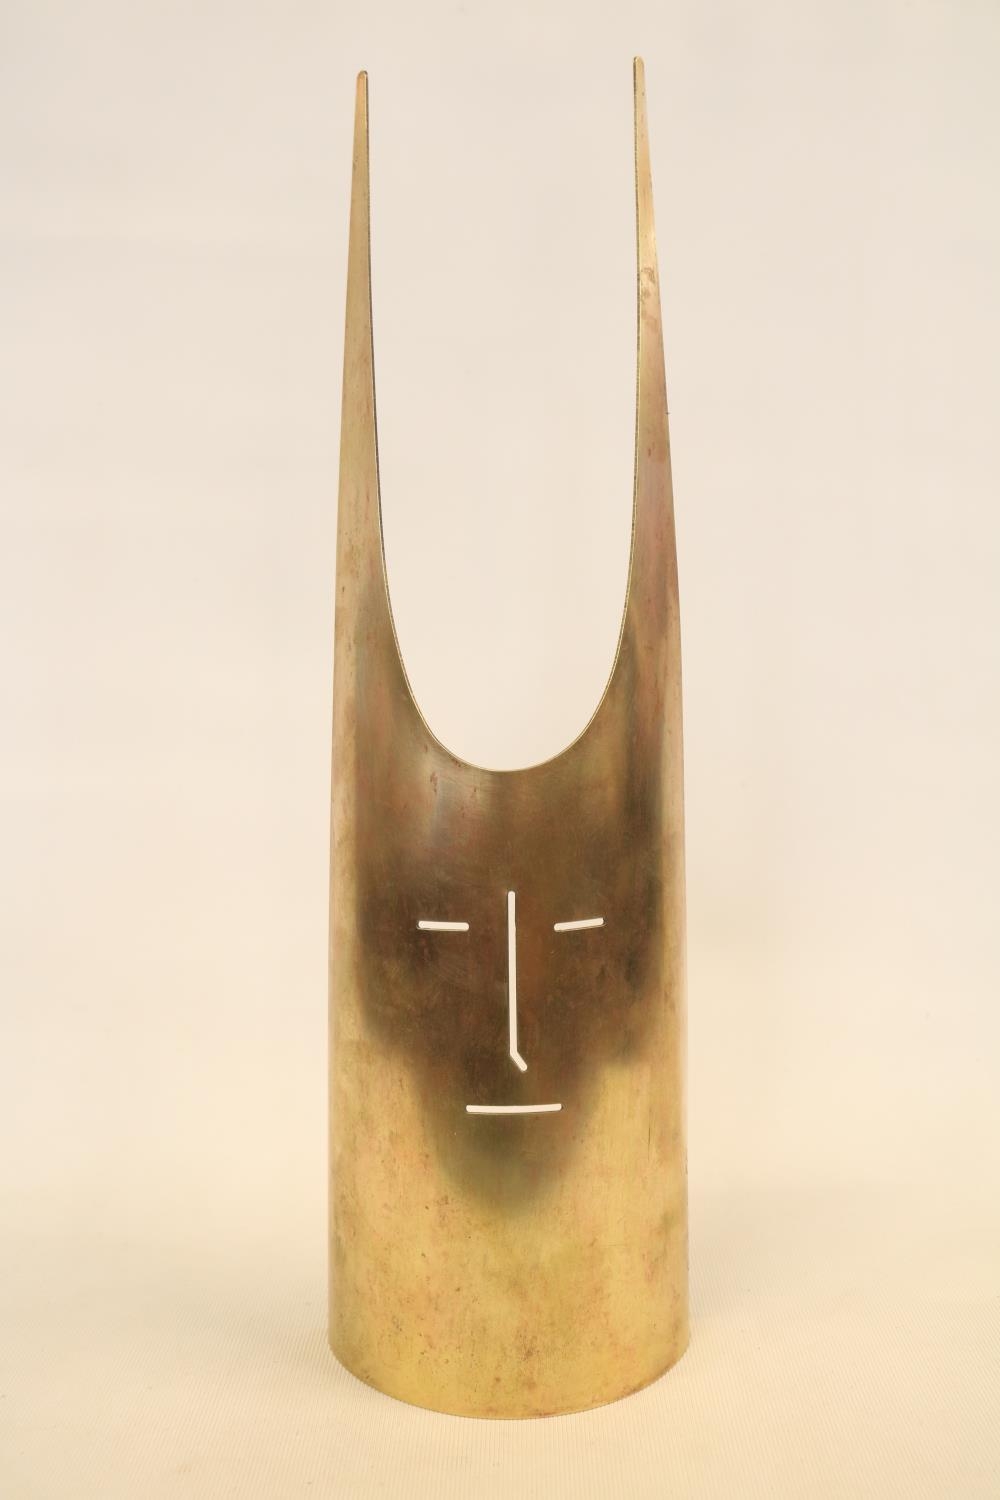 Gio Ponti (Italian, 1891-1979). Brass “Horned Mask” designed in 1979 for Lino Sabattini with - Image 2 of 3